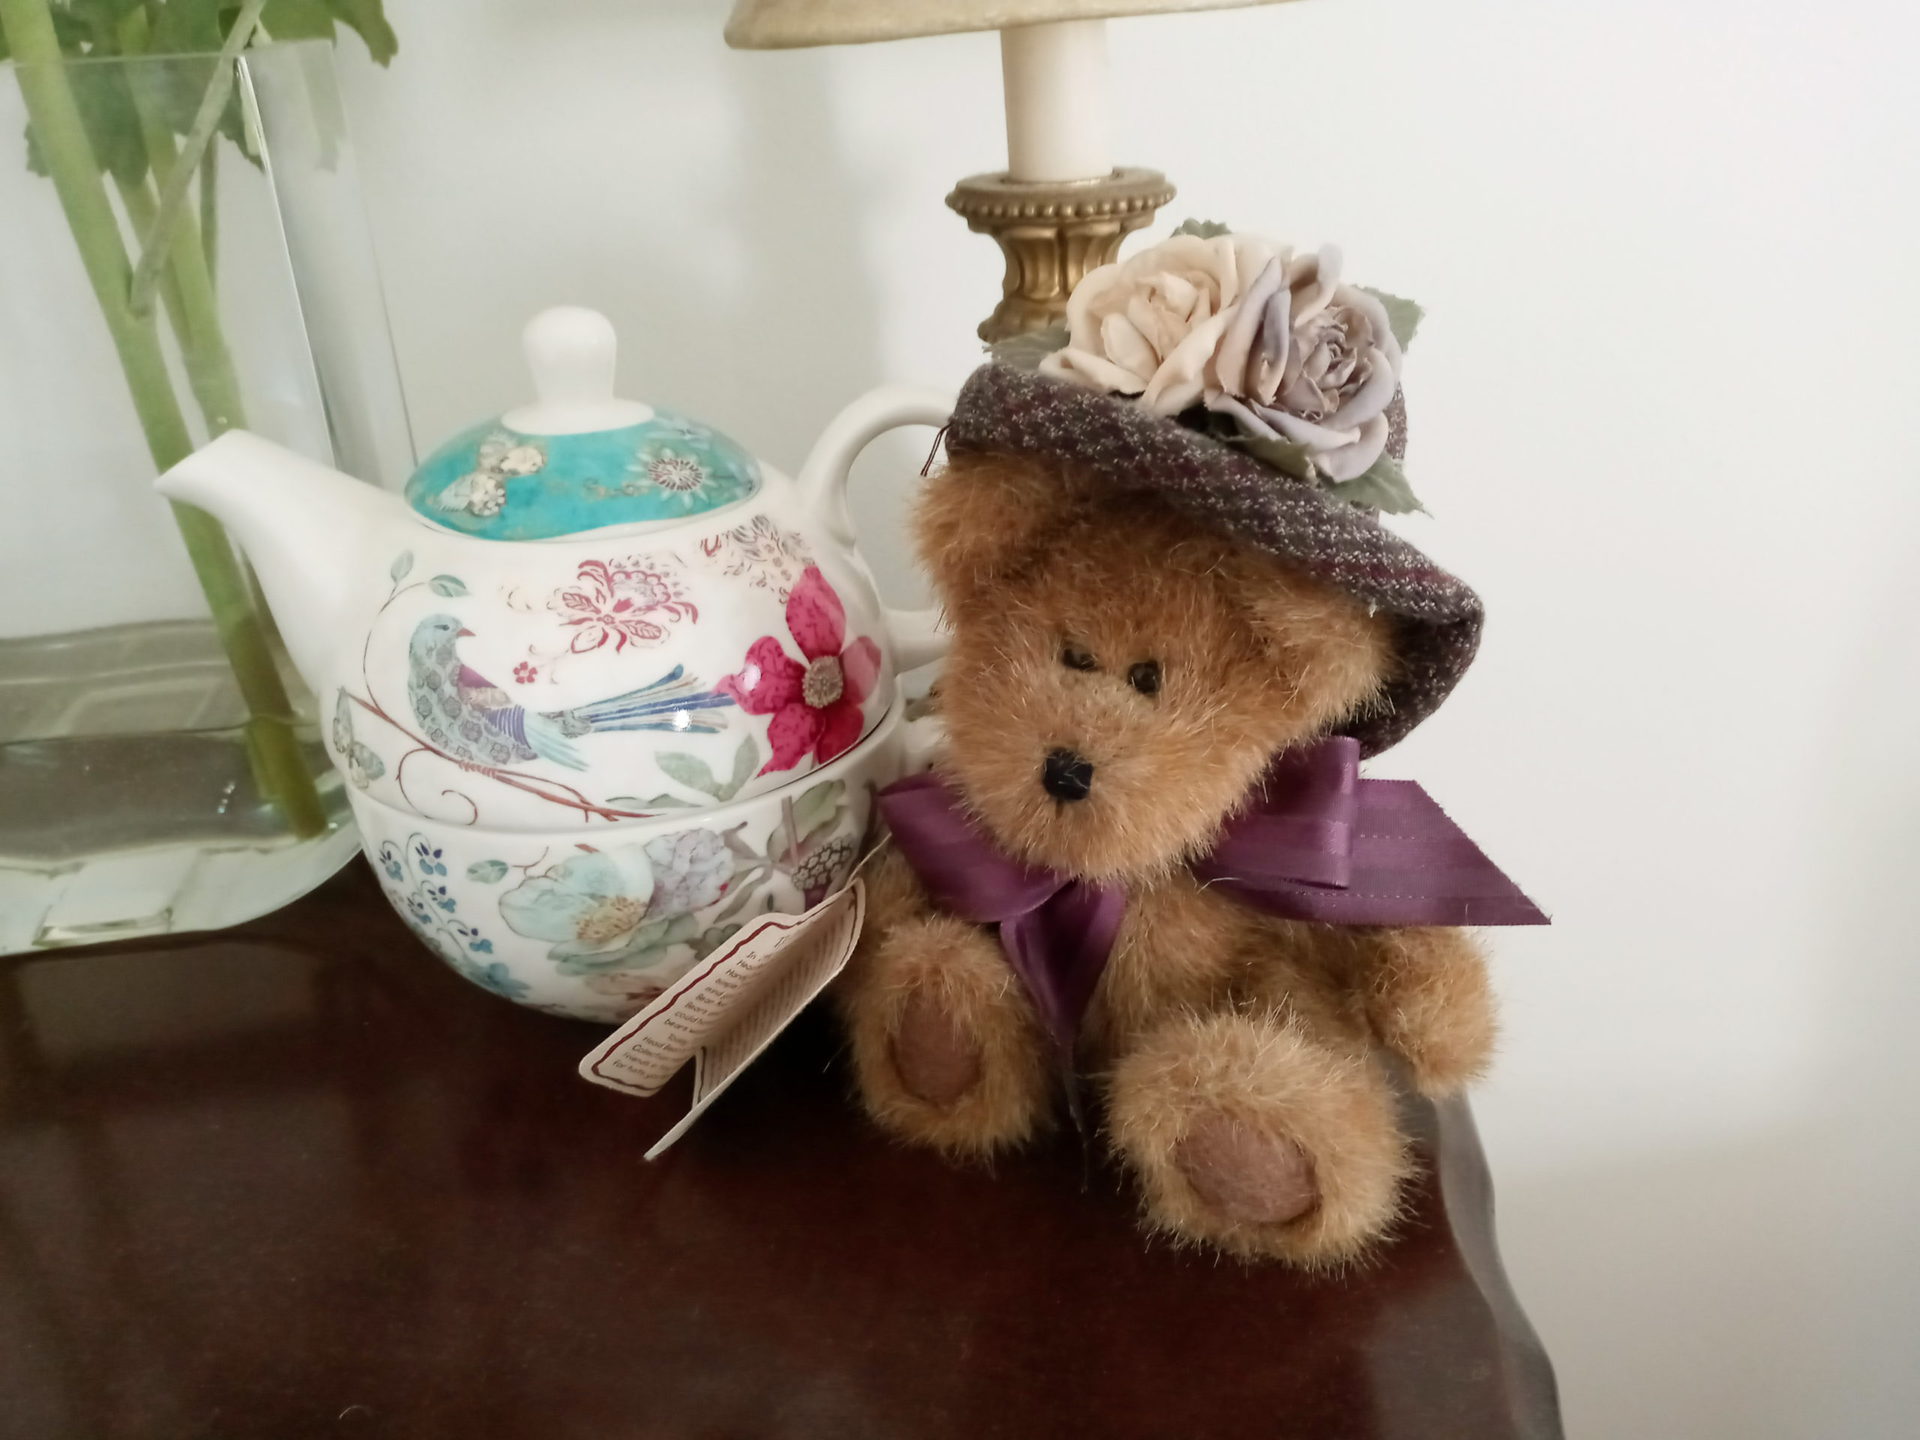 An image of a stuffed bear taken with the LG Reflect